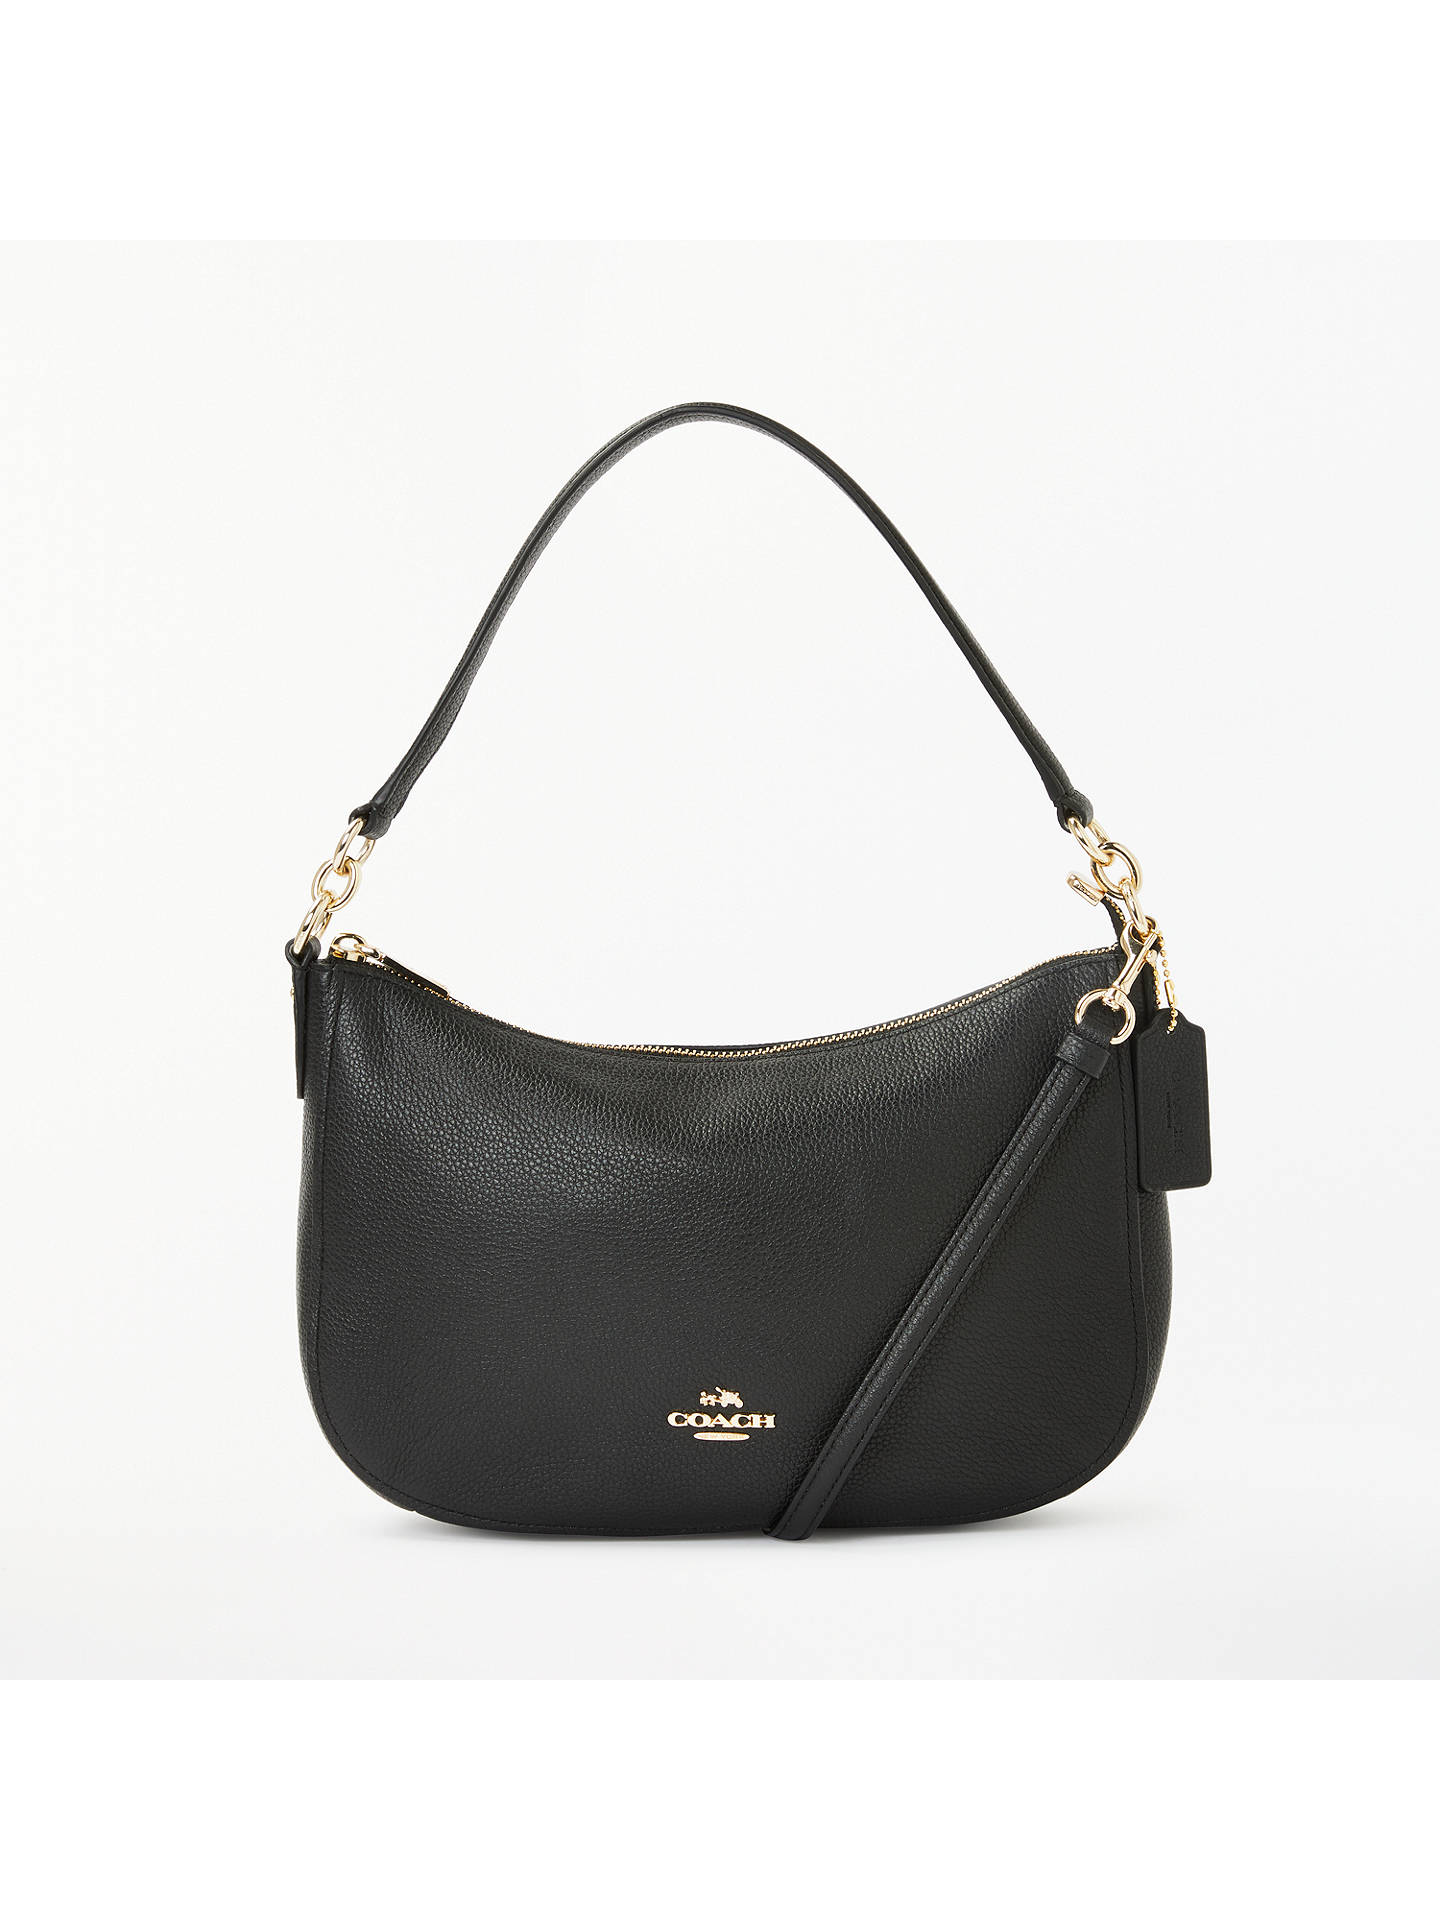 Coach Chelsea Polished Pebble Leather Cross Body Bag at John Lewis & Partners